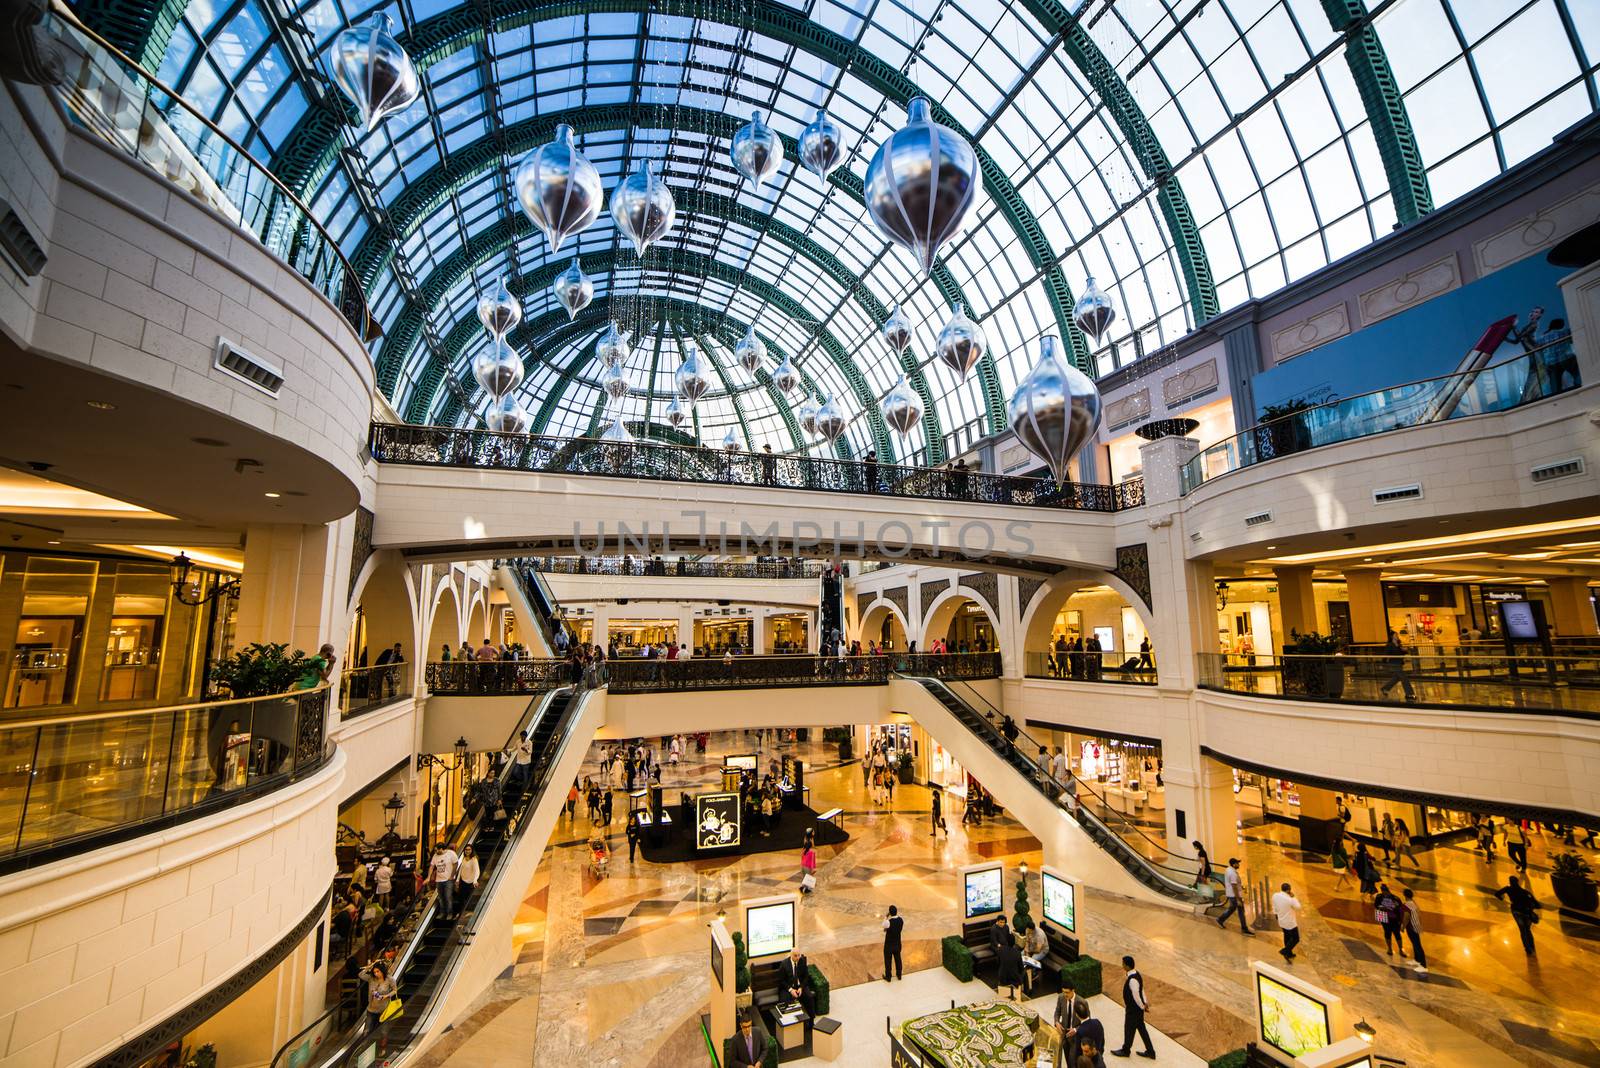 DUBAI, UAE - DECEMBER 19: Shoppers at Mall of the Emirates on December 19, 2013 in Dubai. Mall of the Emirates is a shopping mall before christmas in the Al Barsha district of Dubai.